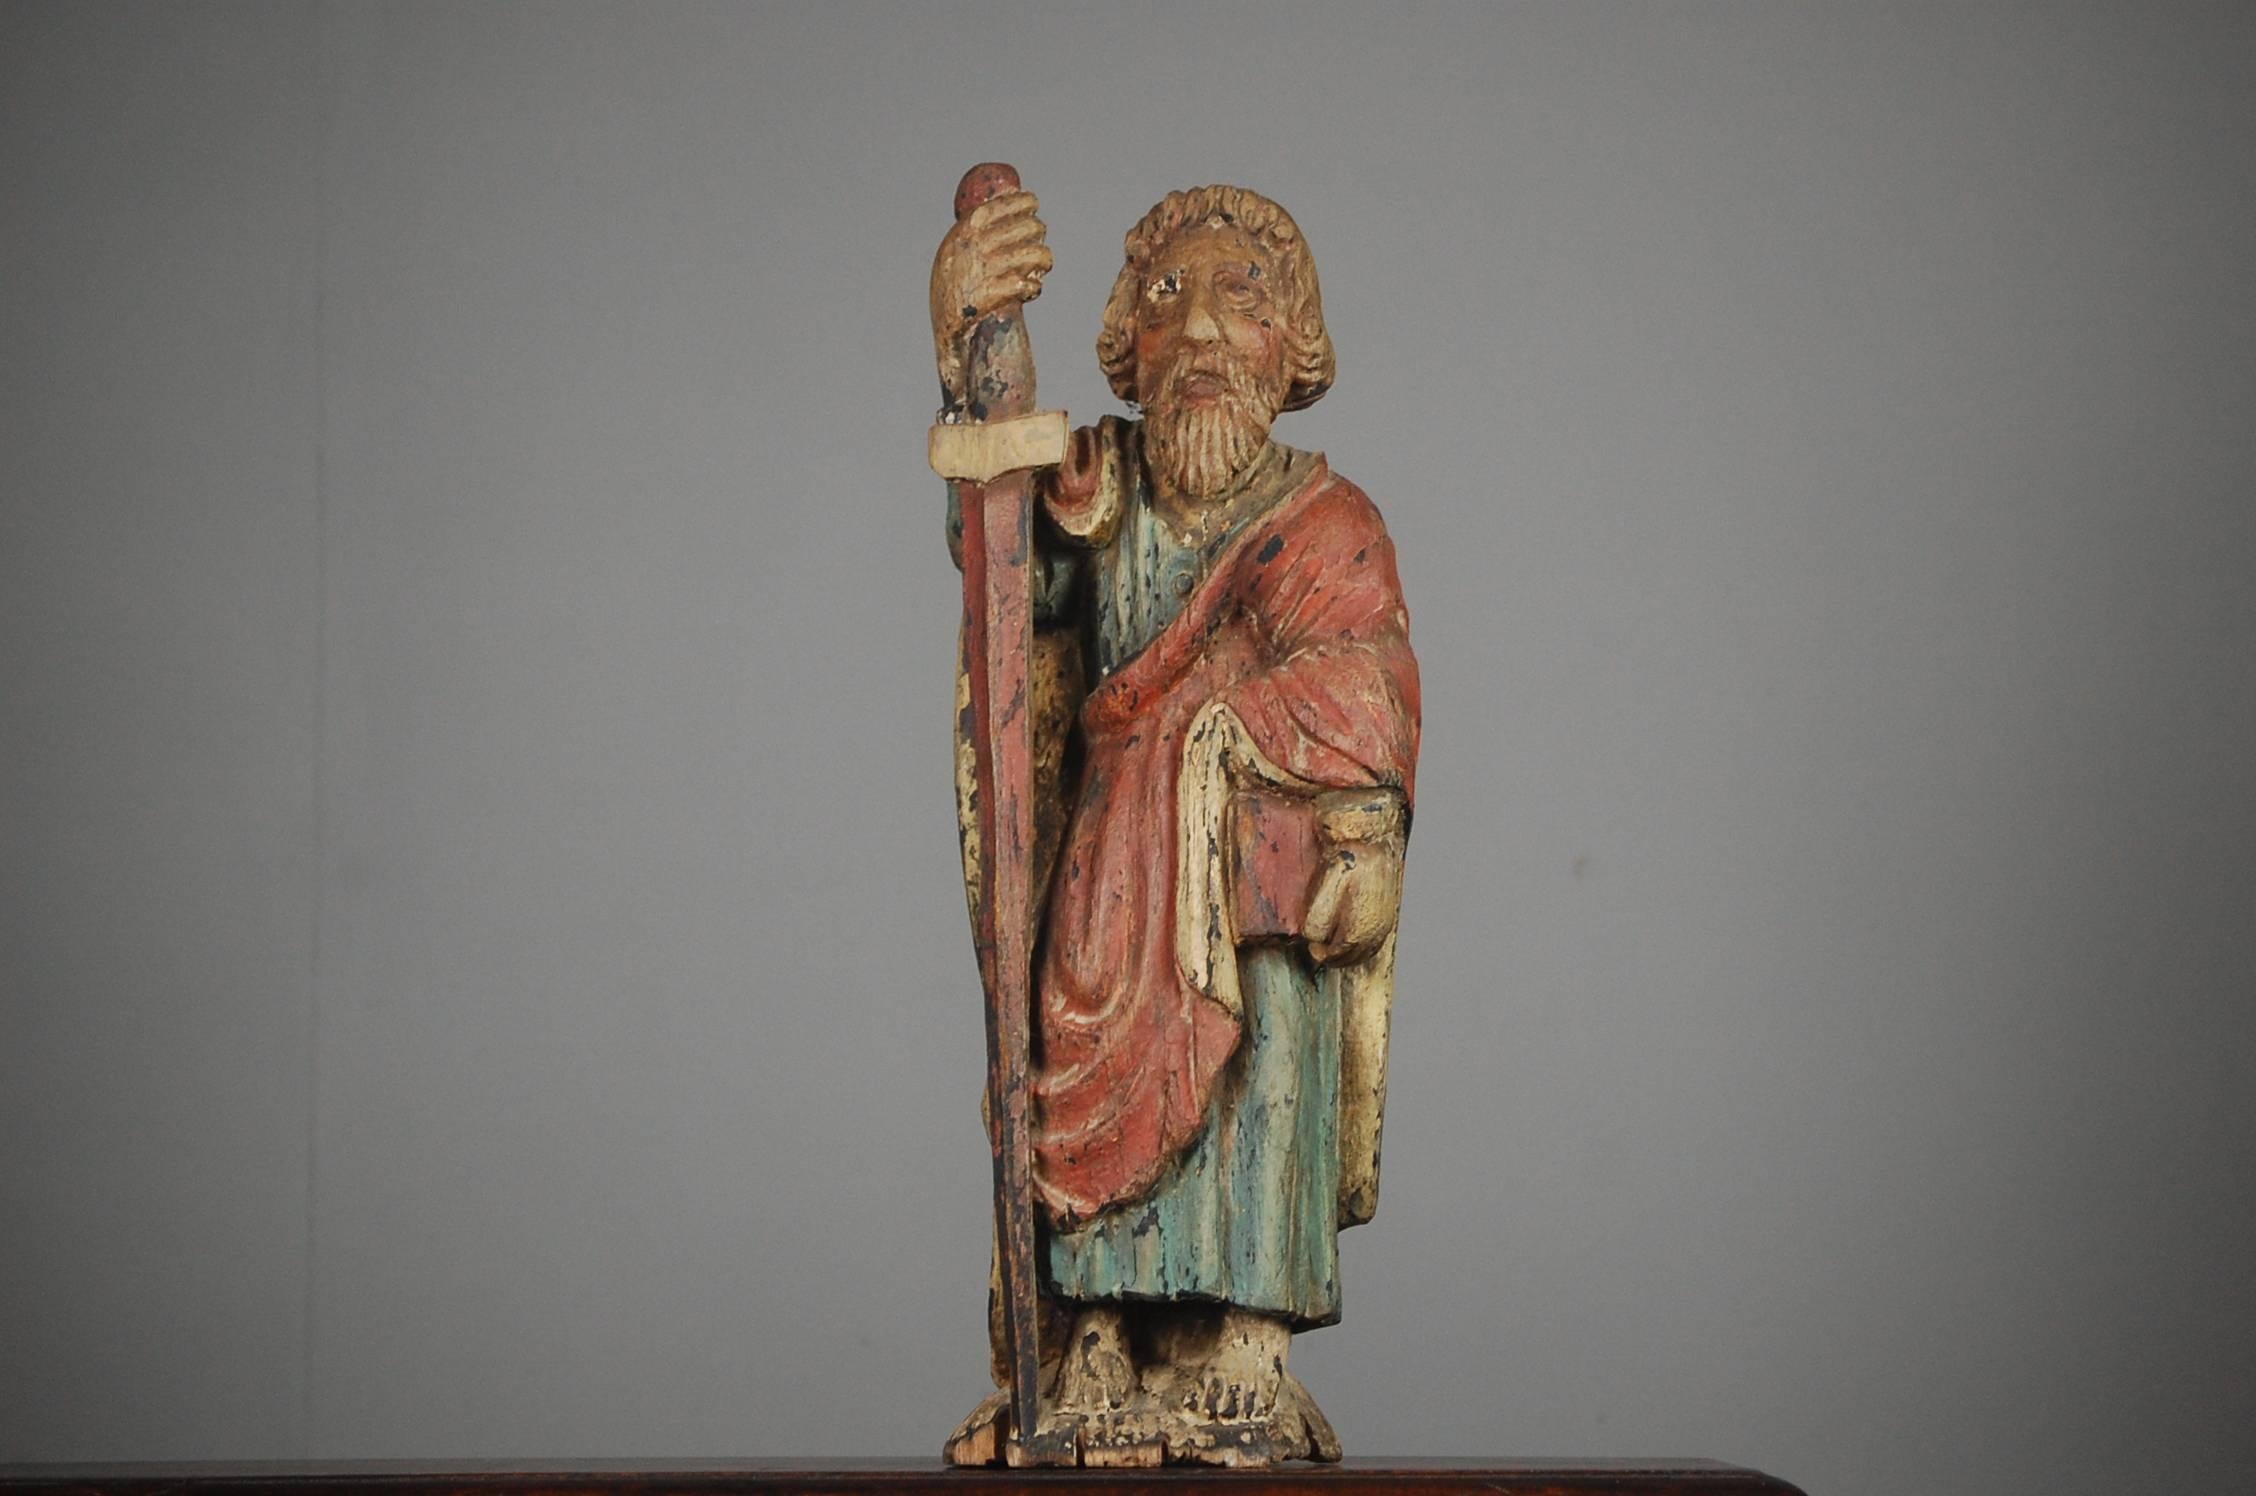 Naïve carved wood, original distressed paint finish depicting Saint Paul, the book carried represents his gospel in the New Testament. The sword a reminder of the means of his martyrdom. Minor Losses. France, circa 1860.